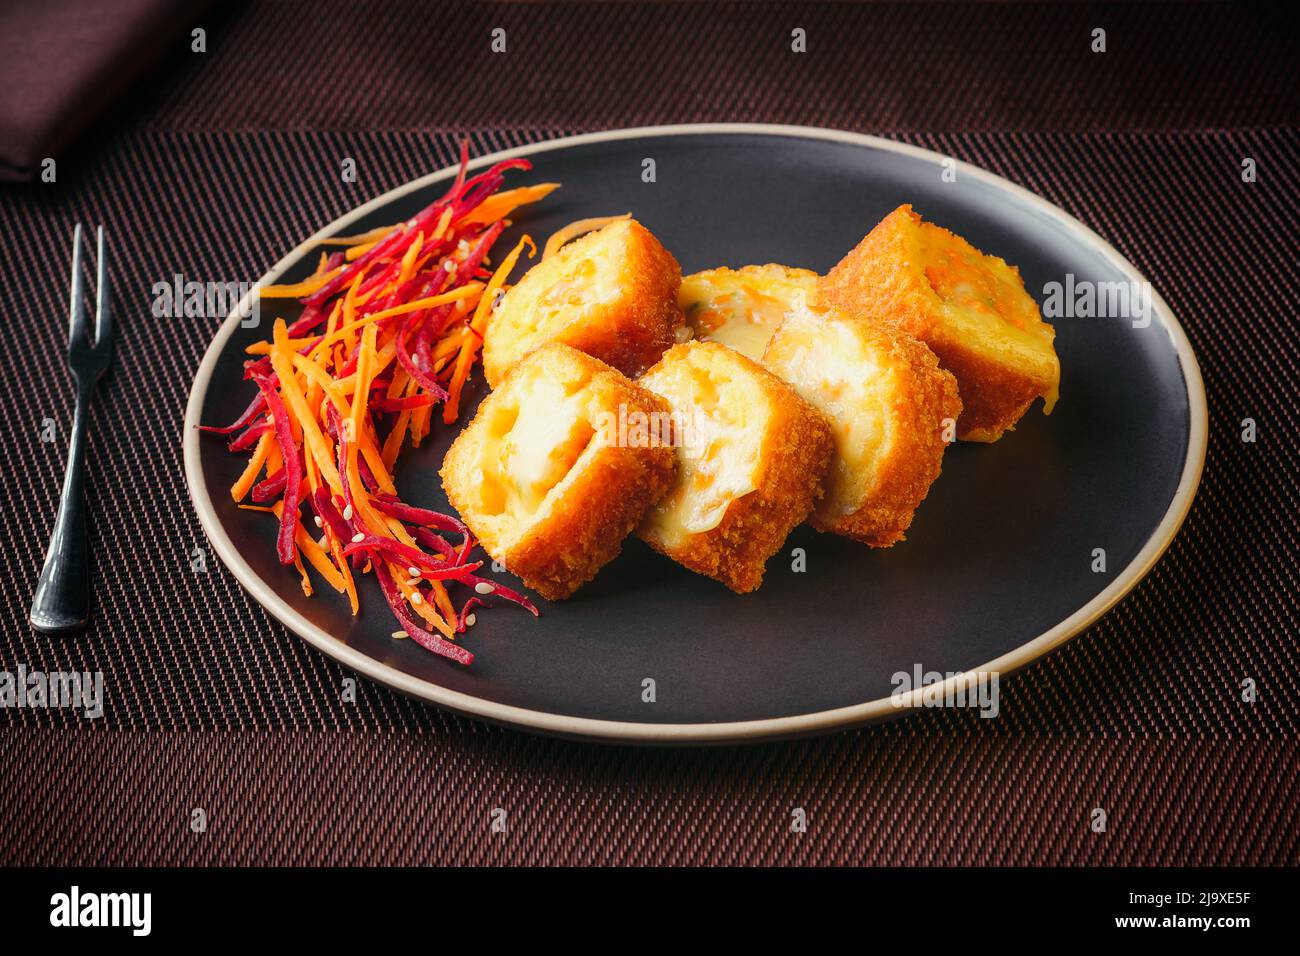 Plate of Japanese sushi rolls with tuna, crab, salmon, eel and gratin rolls, on a fine table Stock Photo